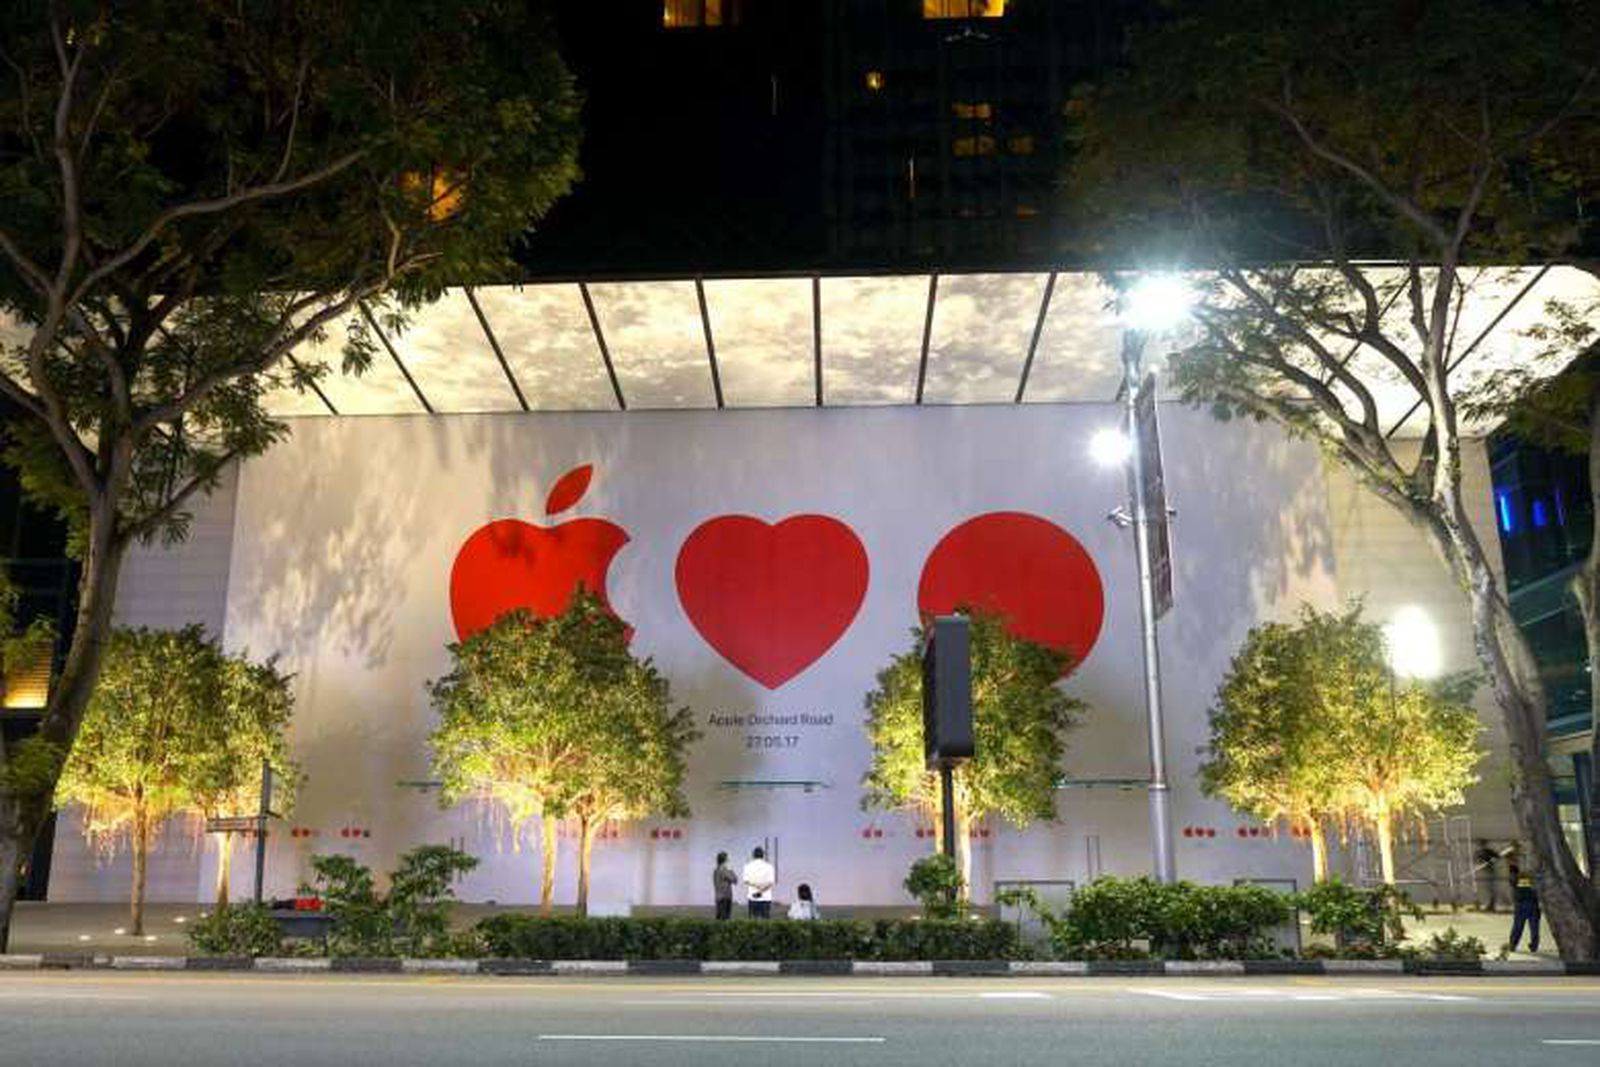 Singapore's First Apple Store Opens May 27 - MacRumors